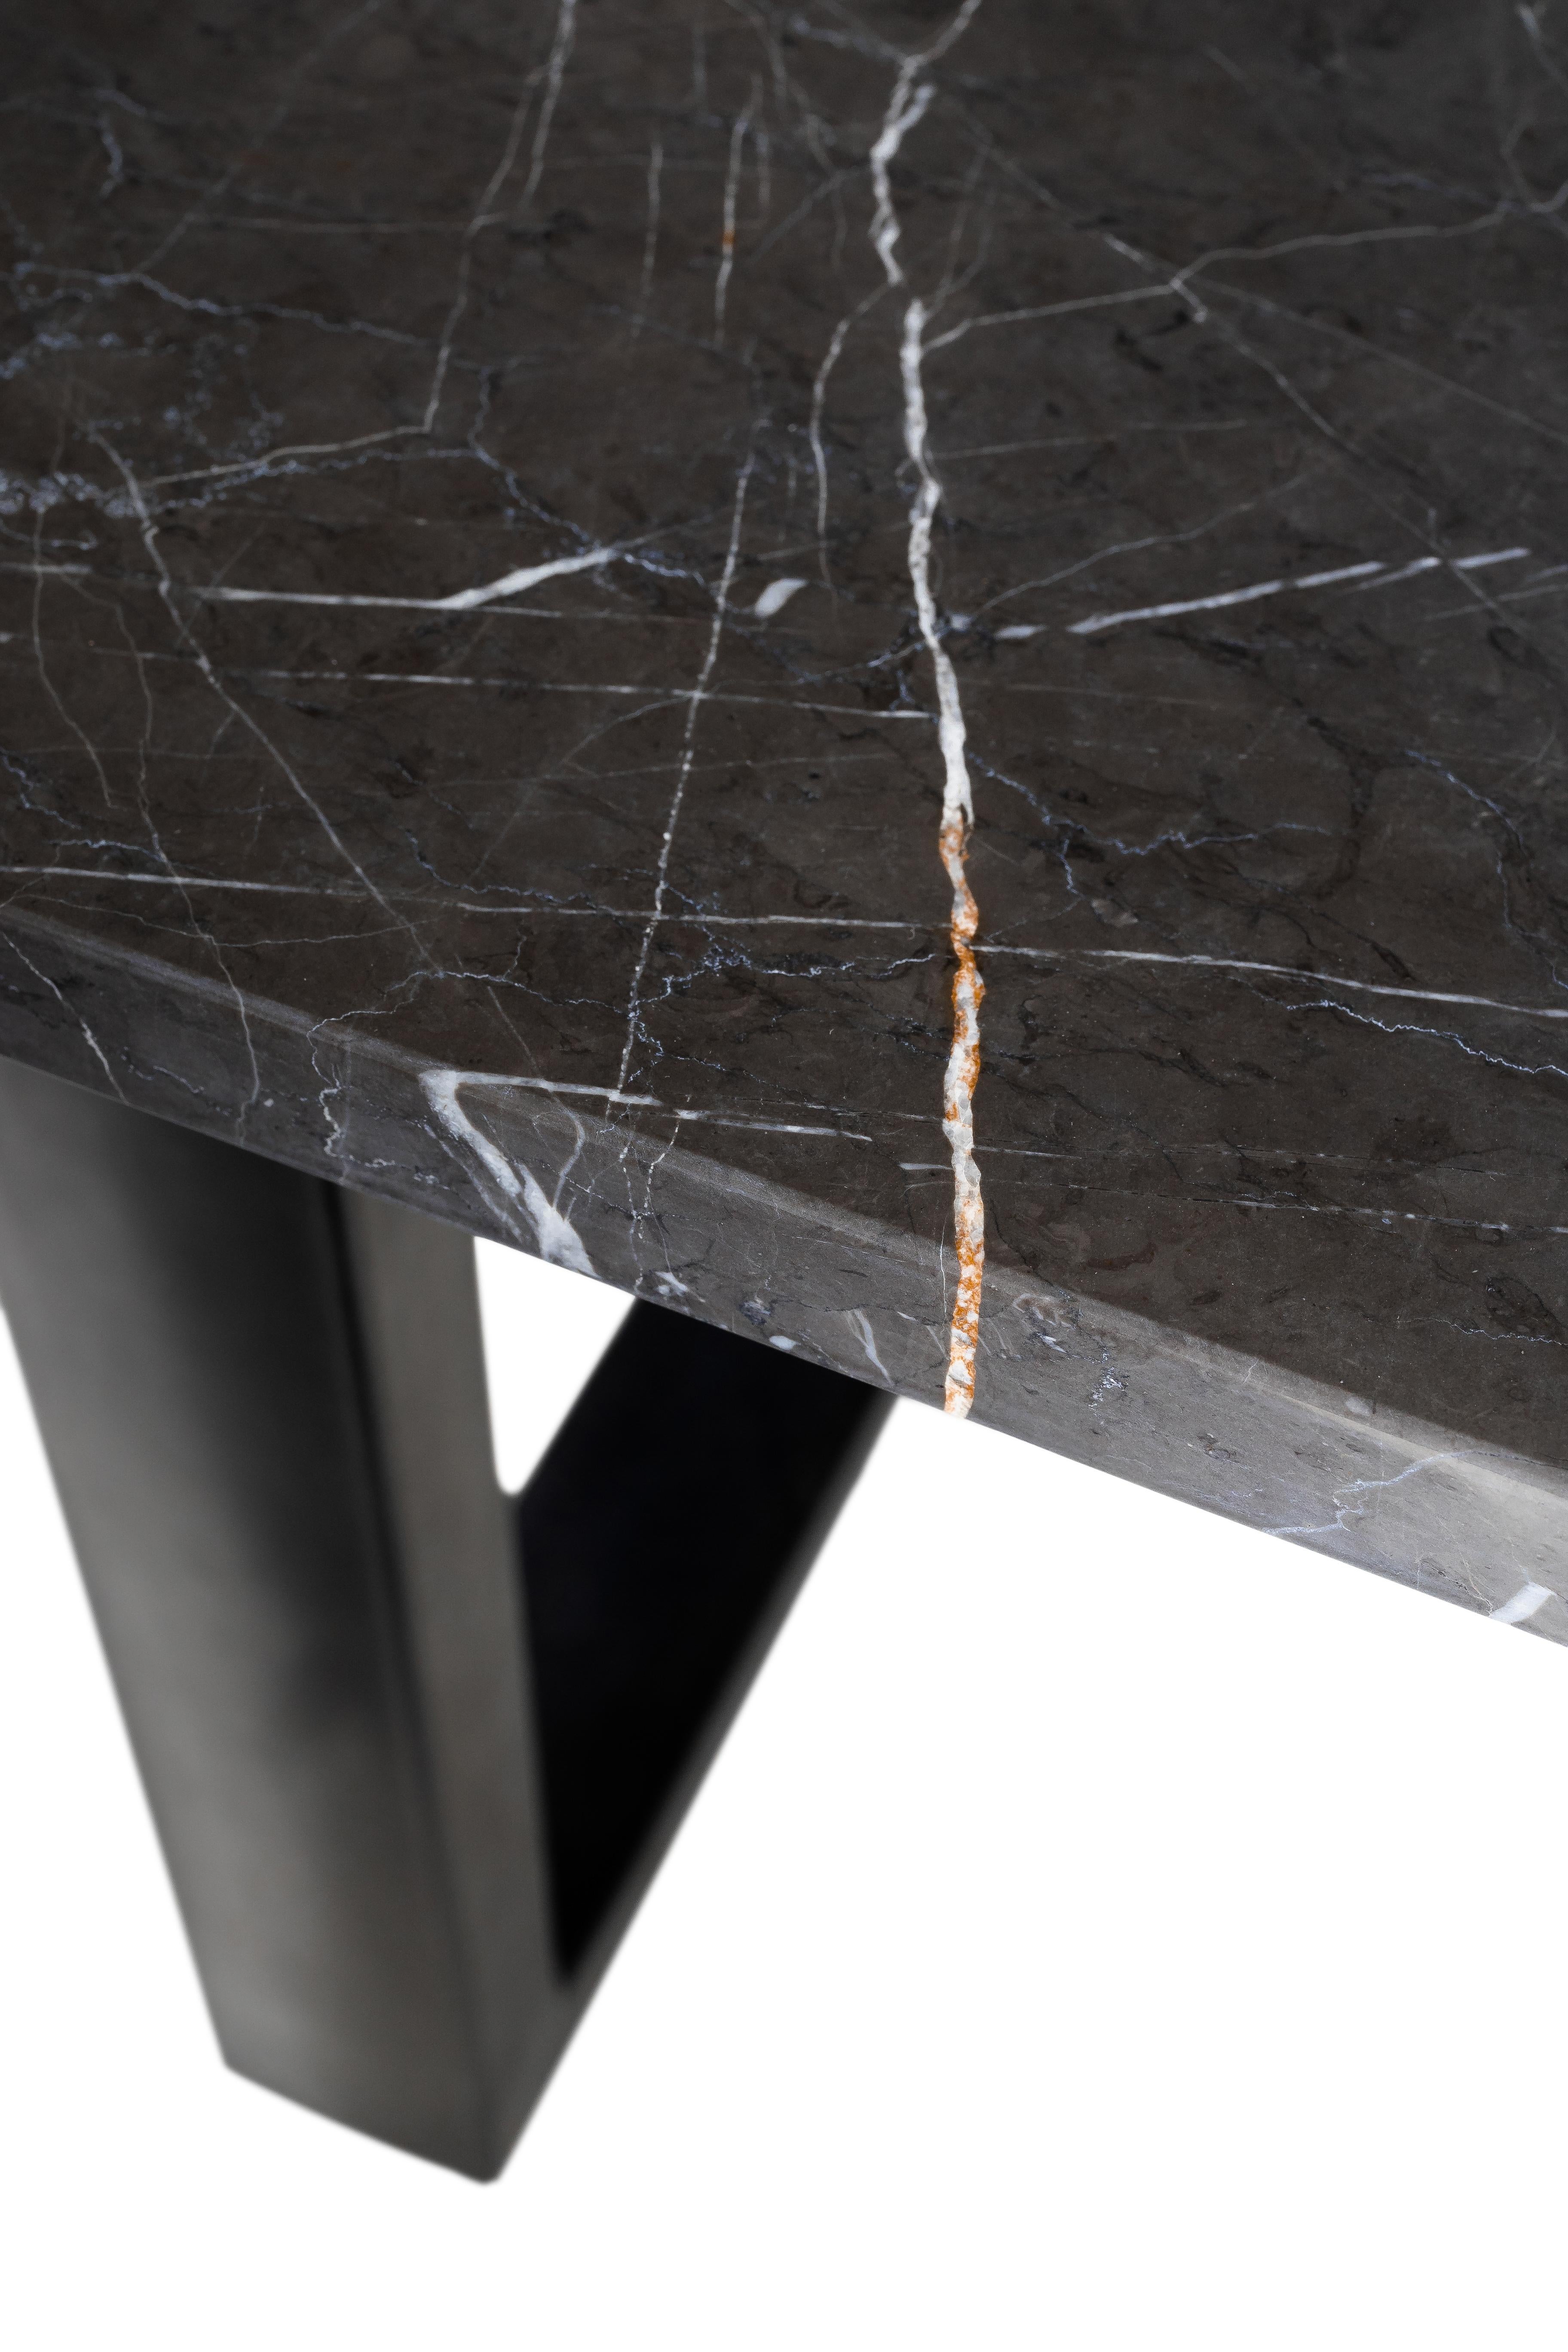 Leathered Pietra Grey Marble Top on Black Petina Modern Steel Base In Good Condition For Sale In Dallas, TX